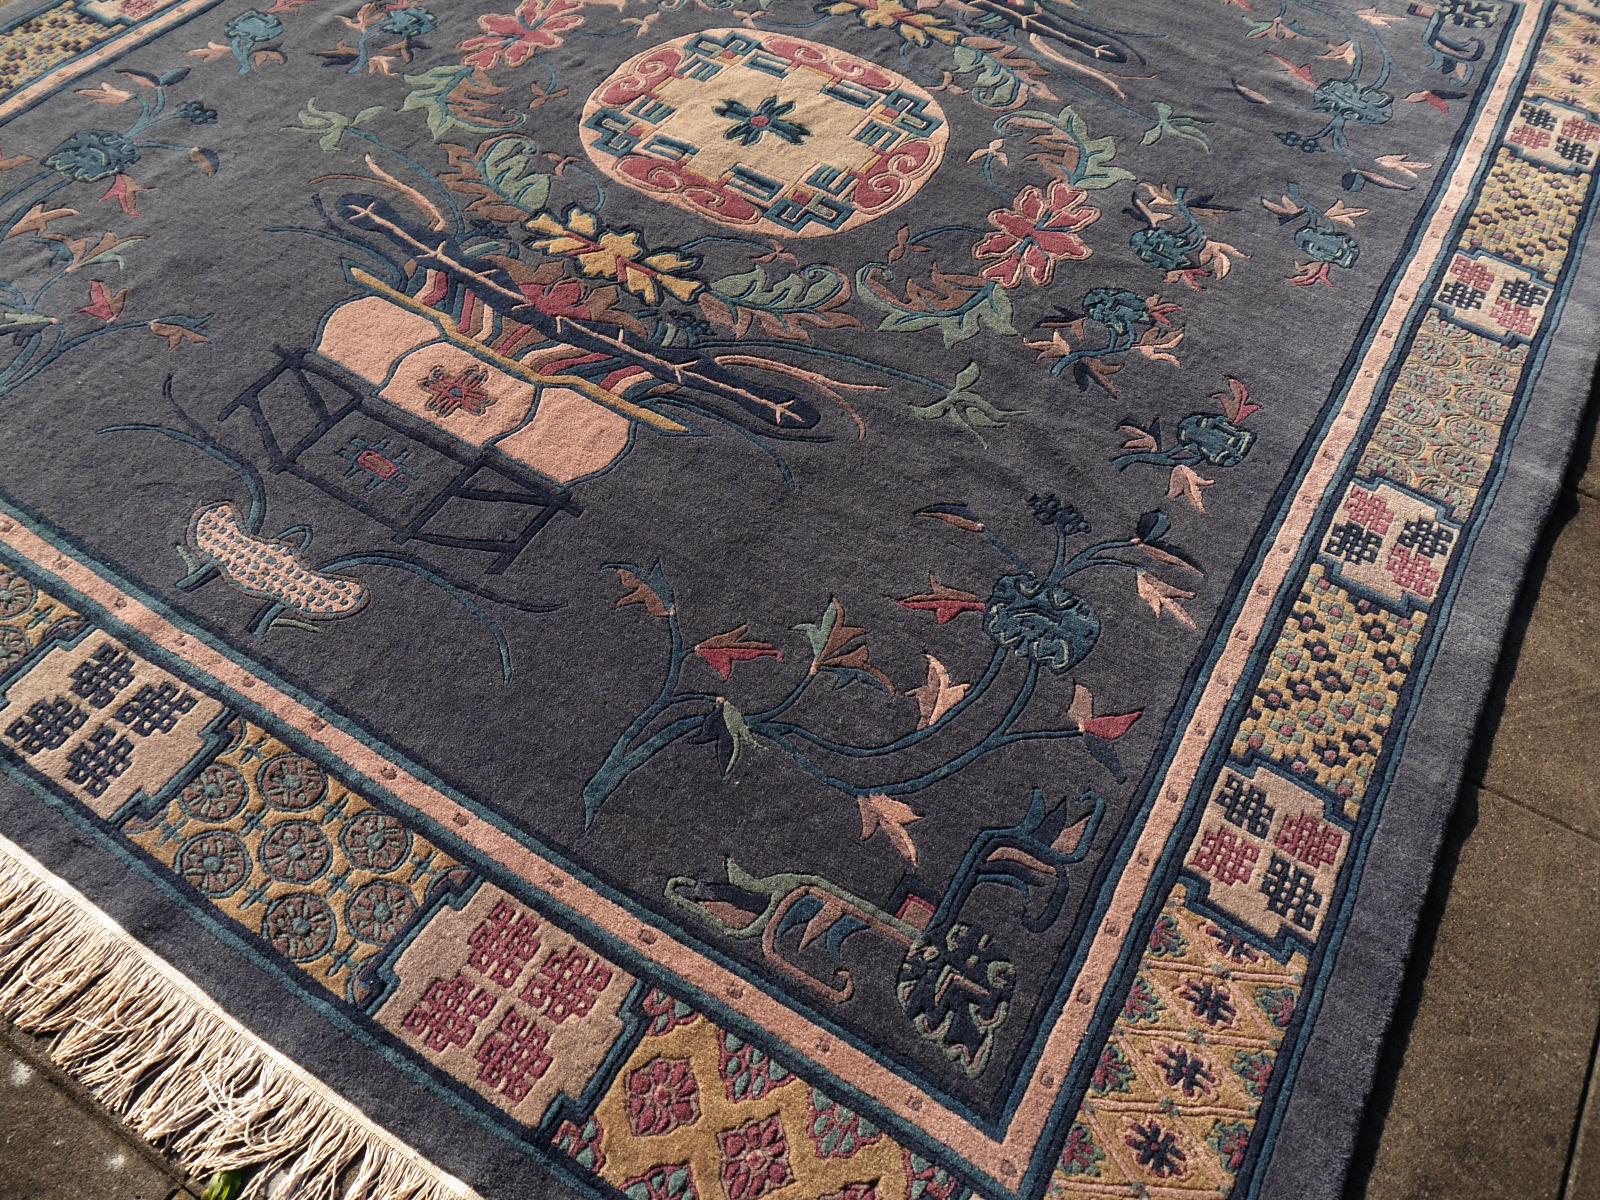 This vintage traditional Tibetan carpet was hand knotted using finest wool. The design shows Medaillon and lucky charm symbols that are common in Tibet and China. The style also reminds of Chinese Khotan rugs. The pile is extra fine, hand spun